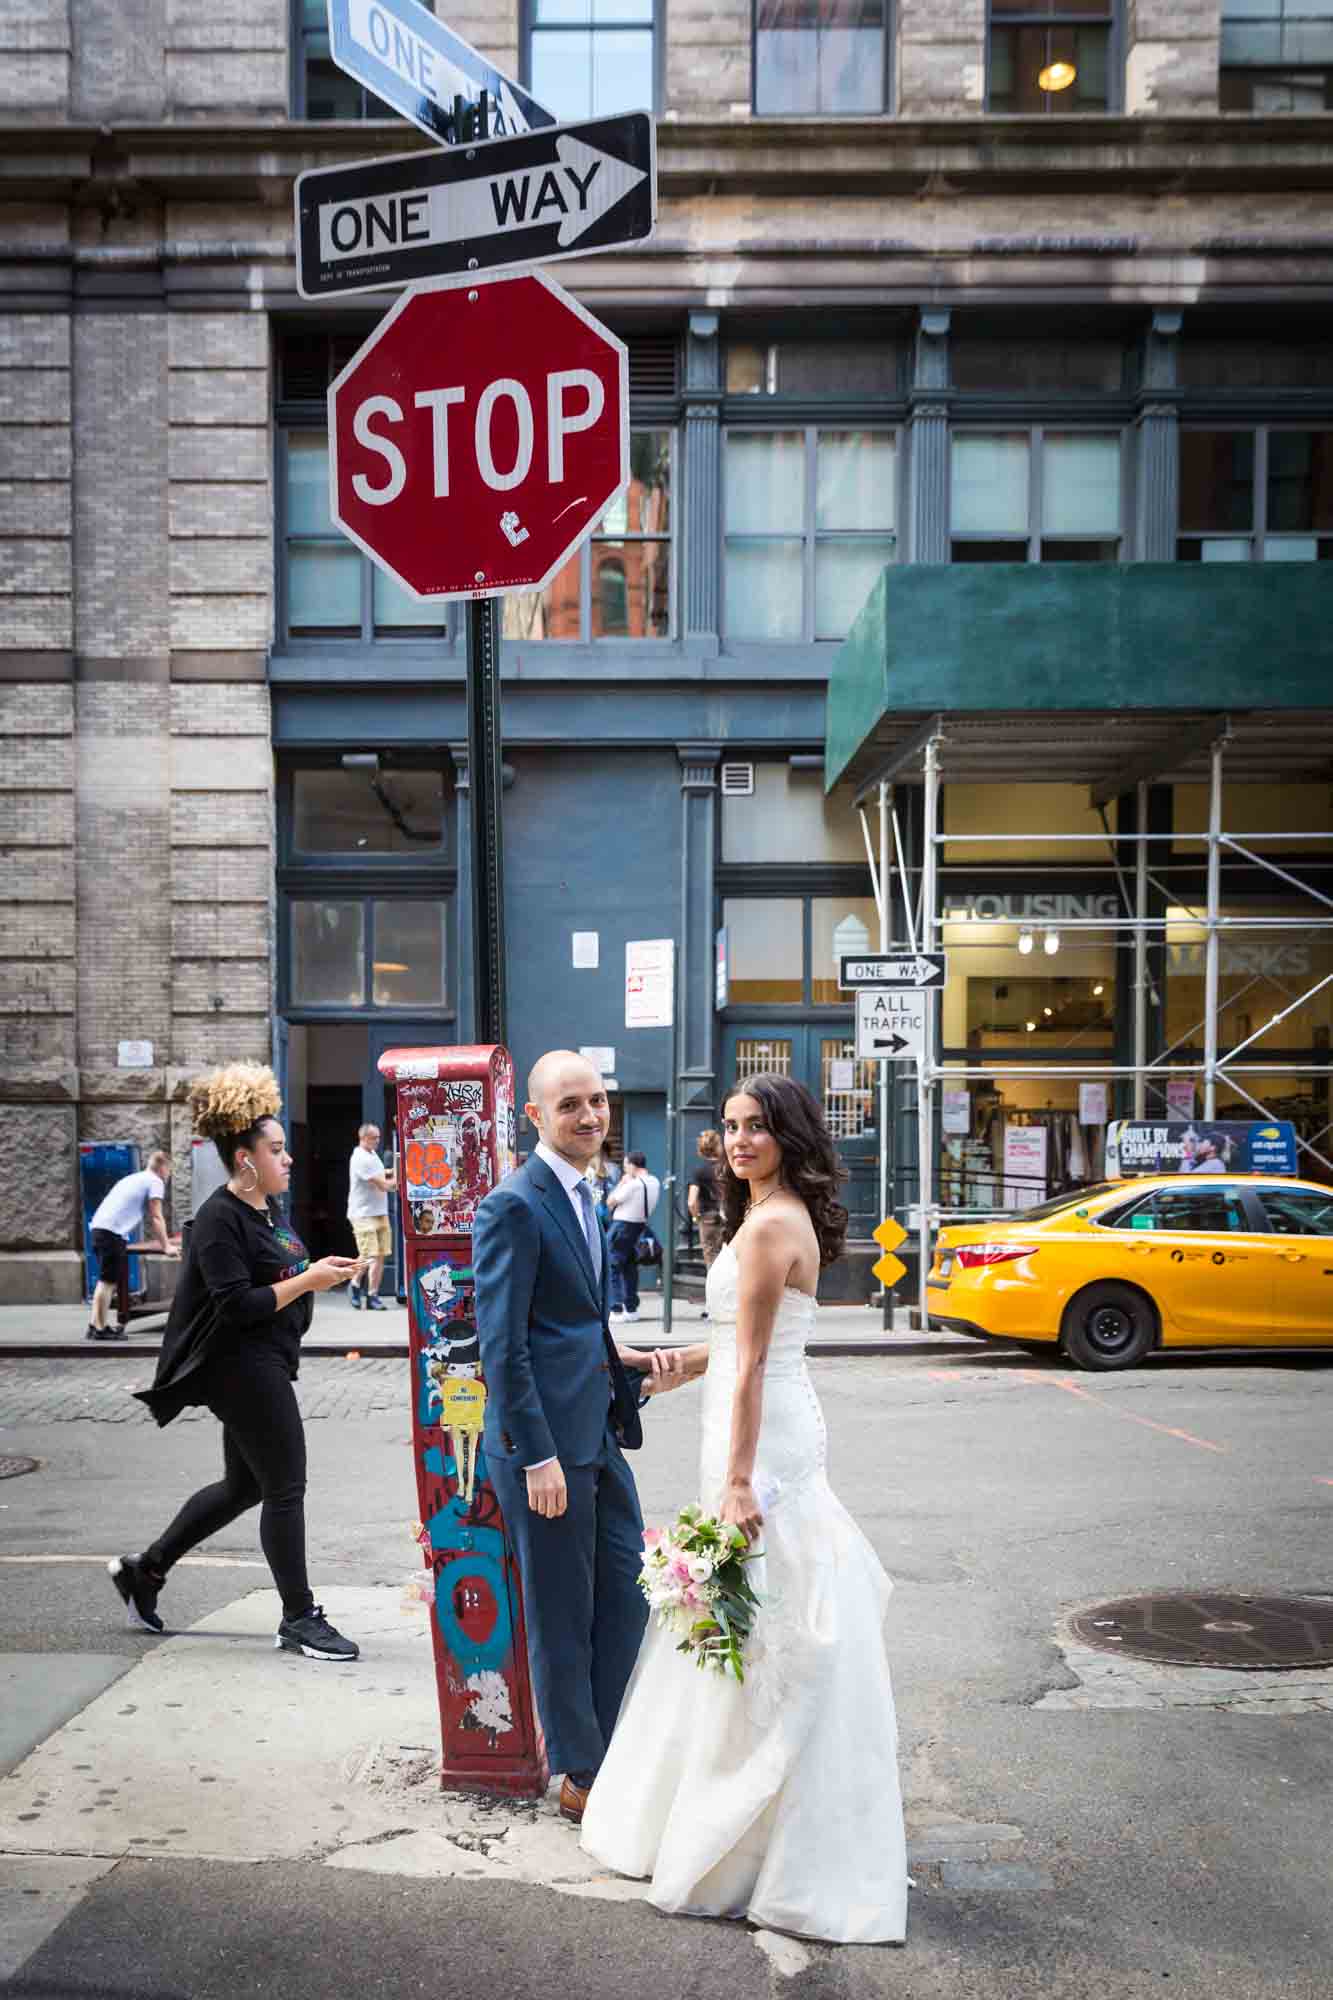 Bride and groom standing against stop sign on NYC street